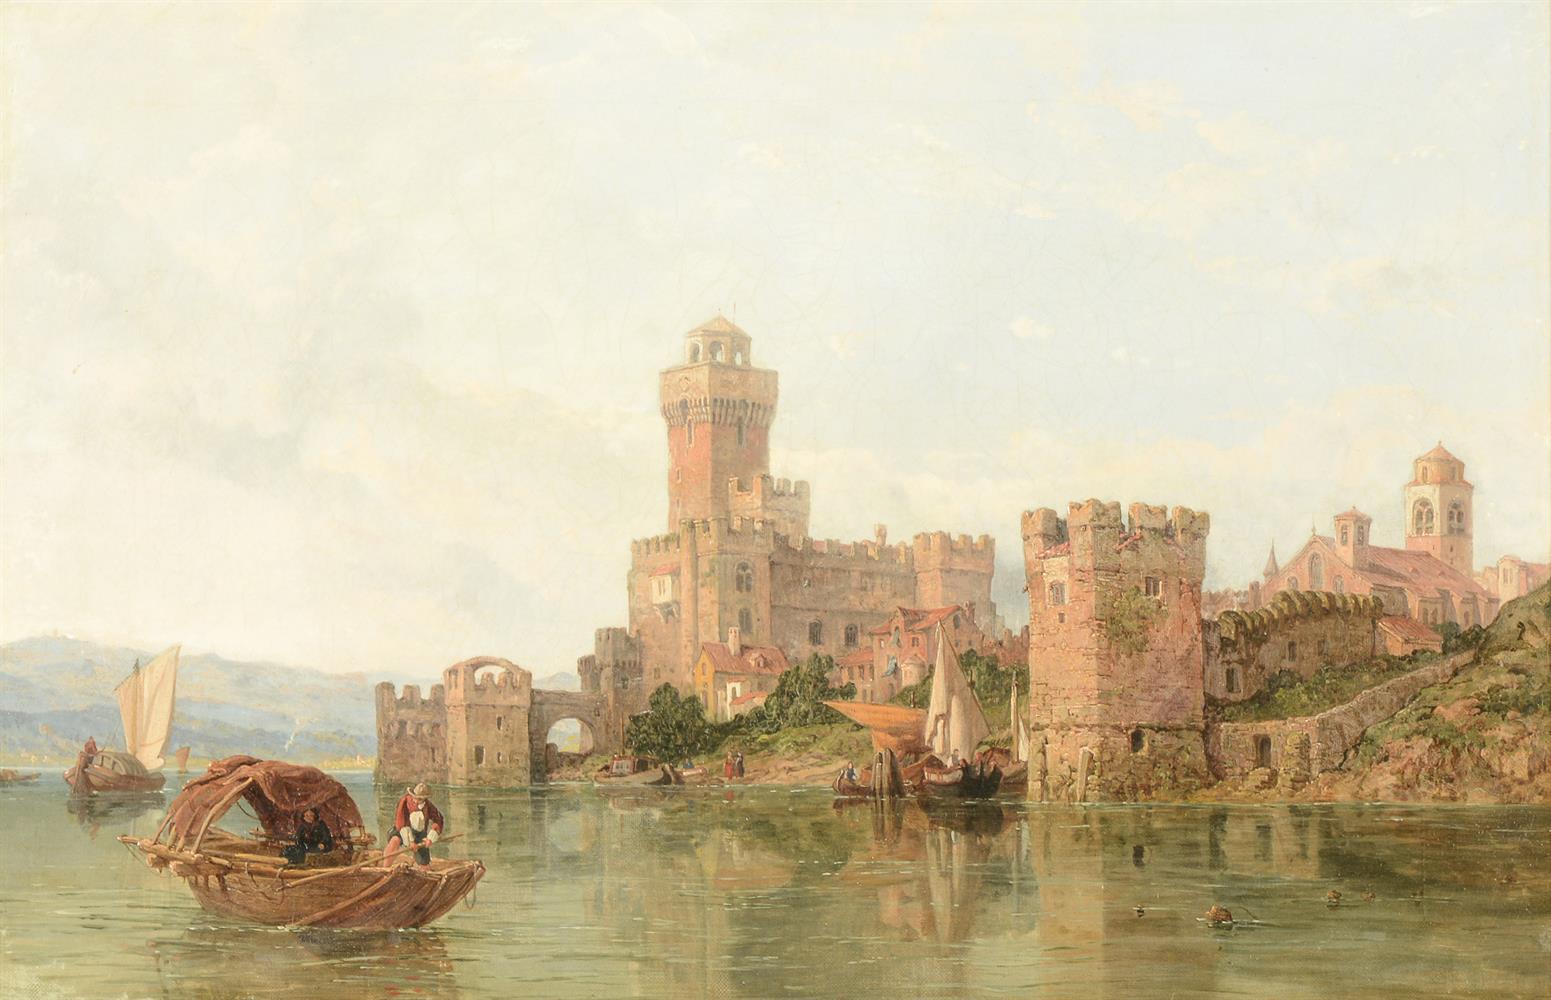 GEORGE CLARKSON STANFIELD (BRITISH 1828 - 1878), THE CASTLE OF SIRMIONE